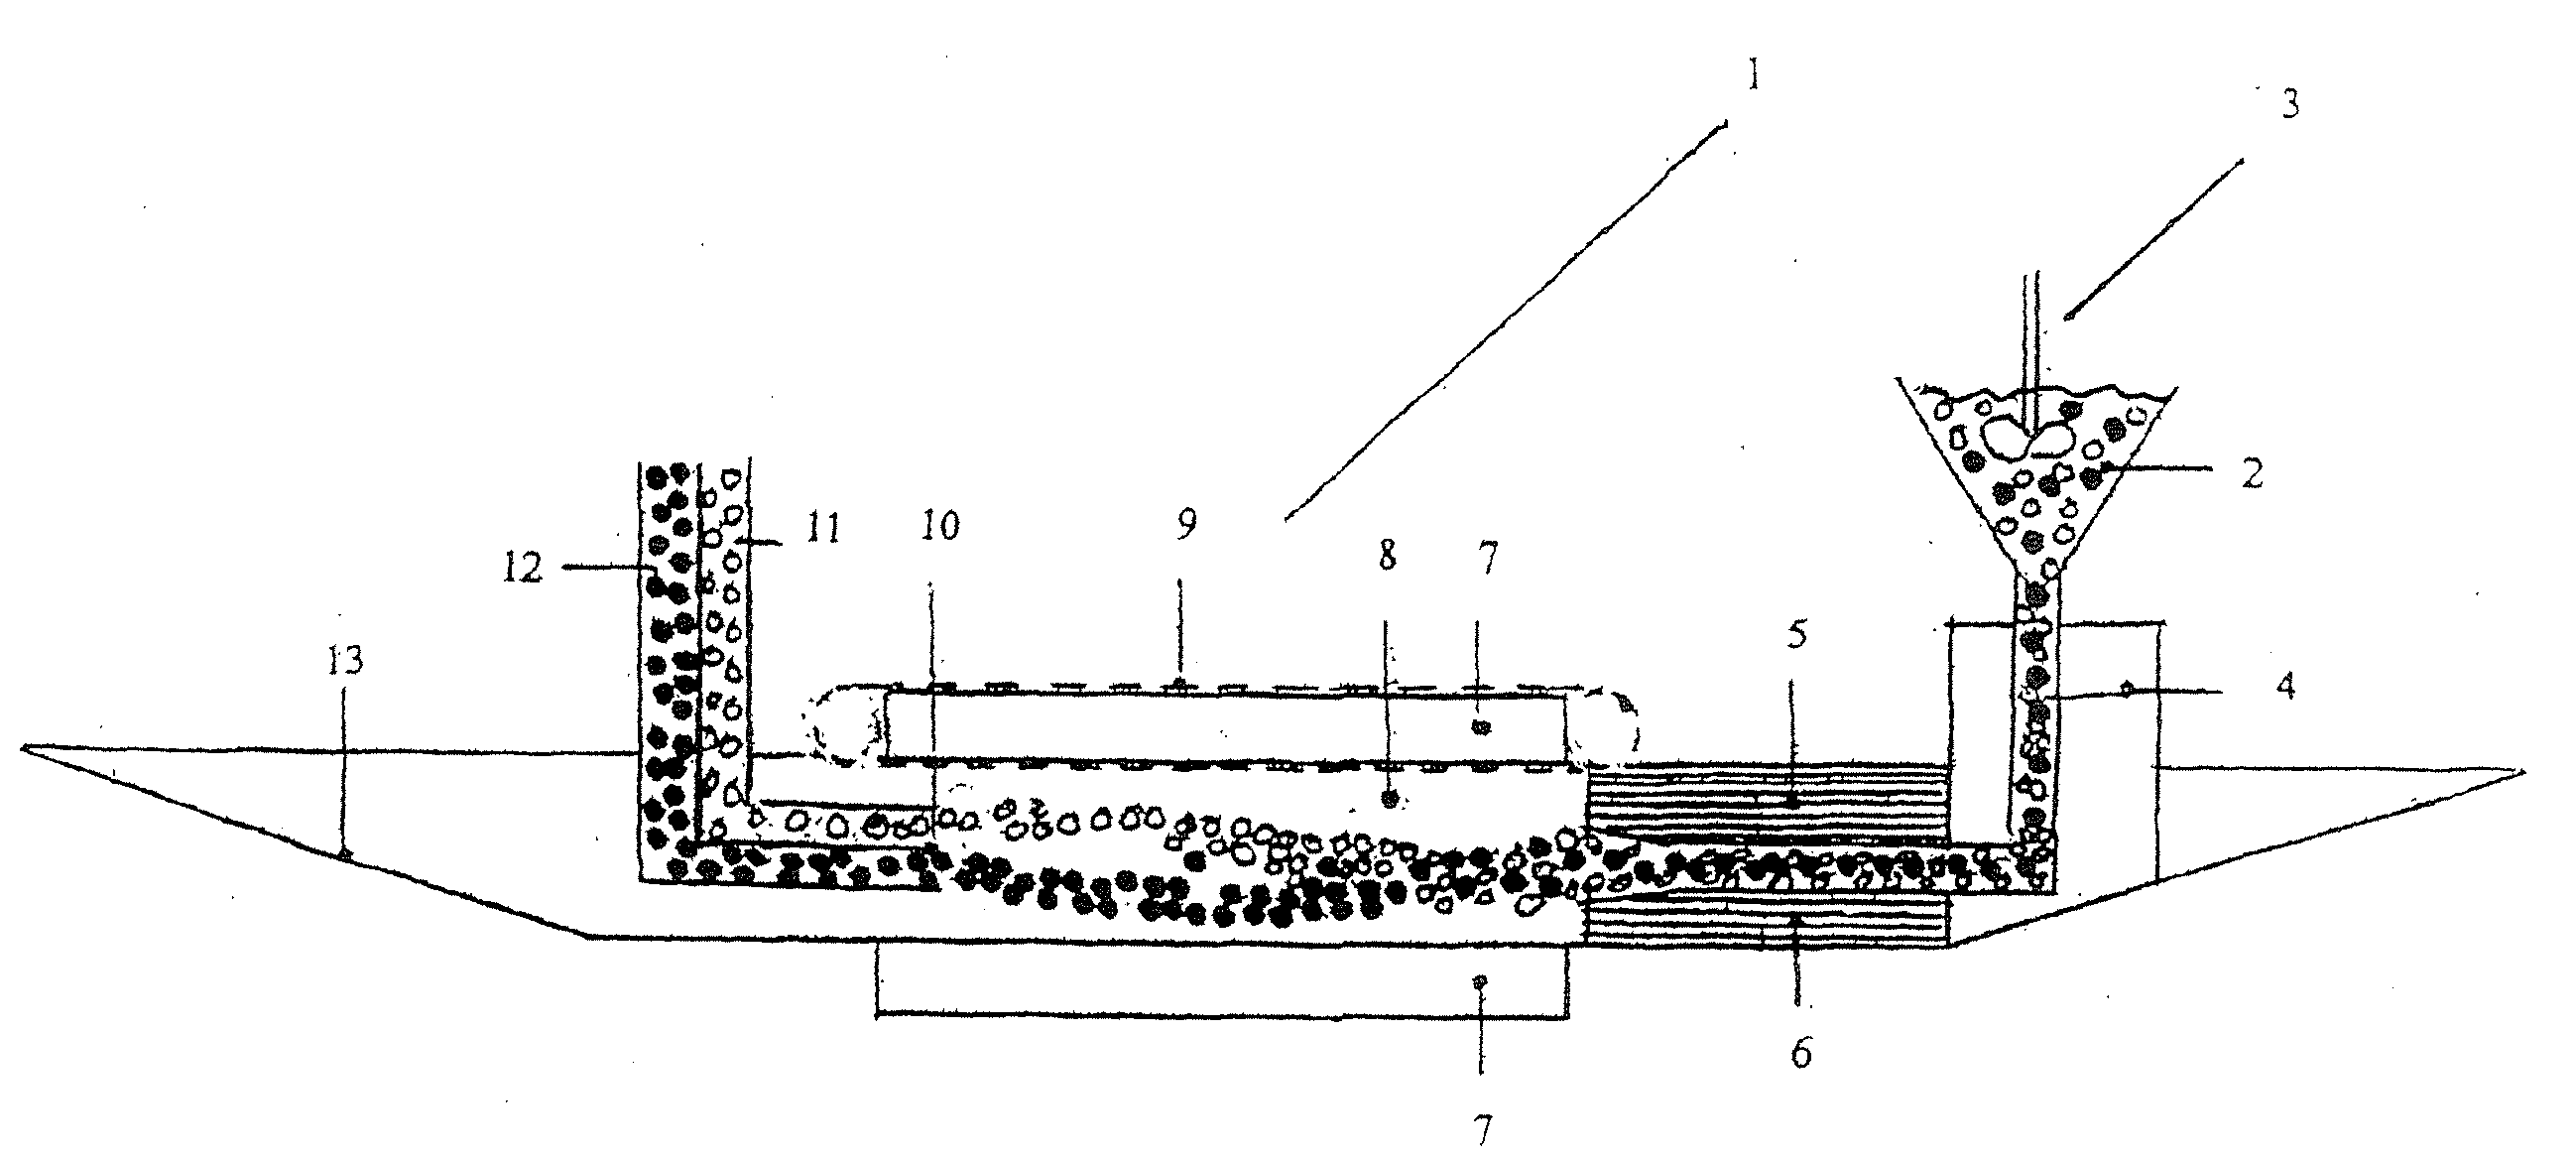 Method and Apparatus for Separating Parts, in Particular Seeds, Having Different Densities